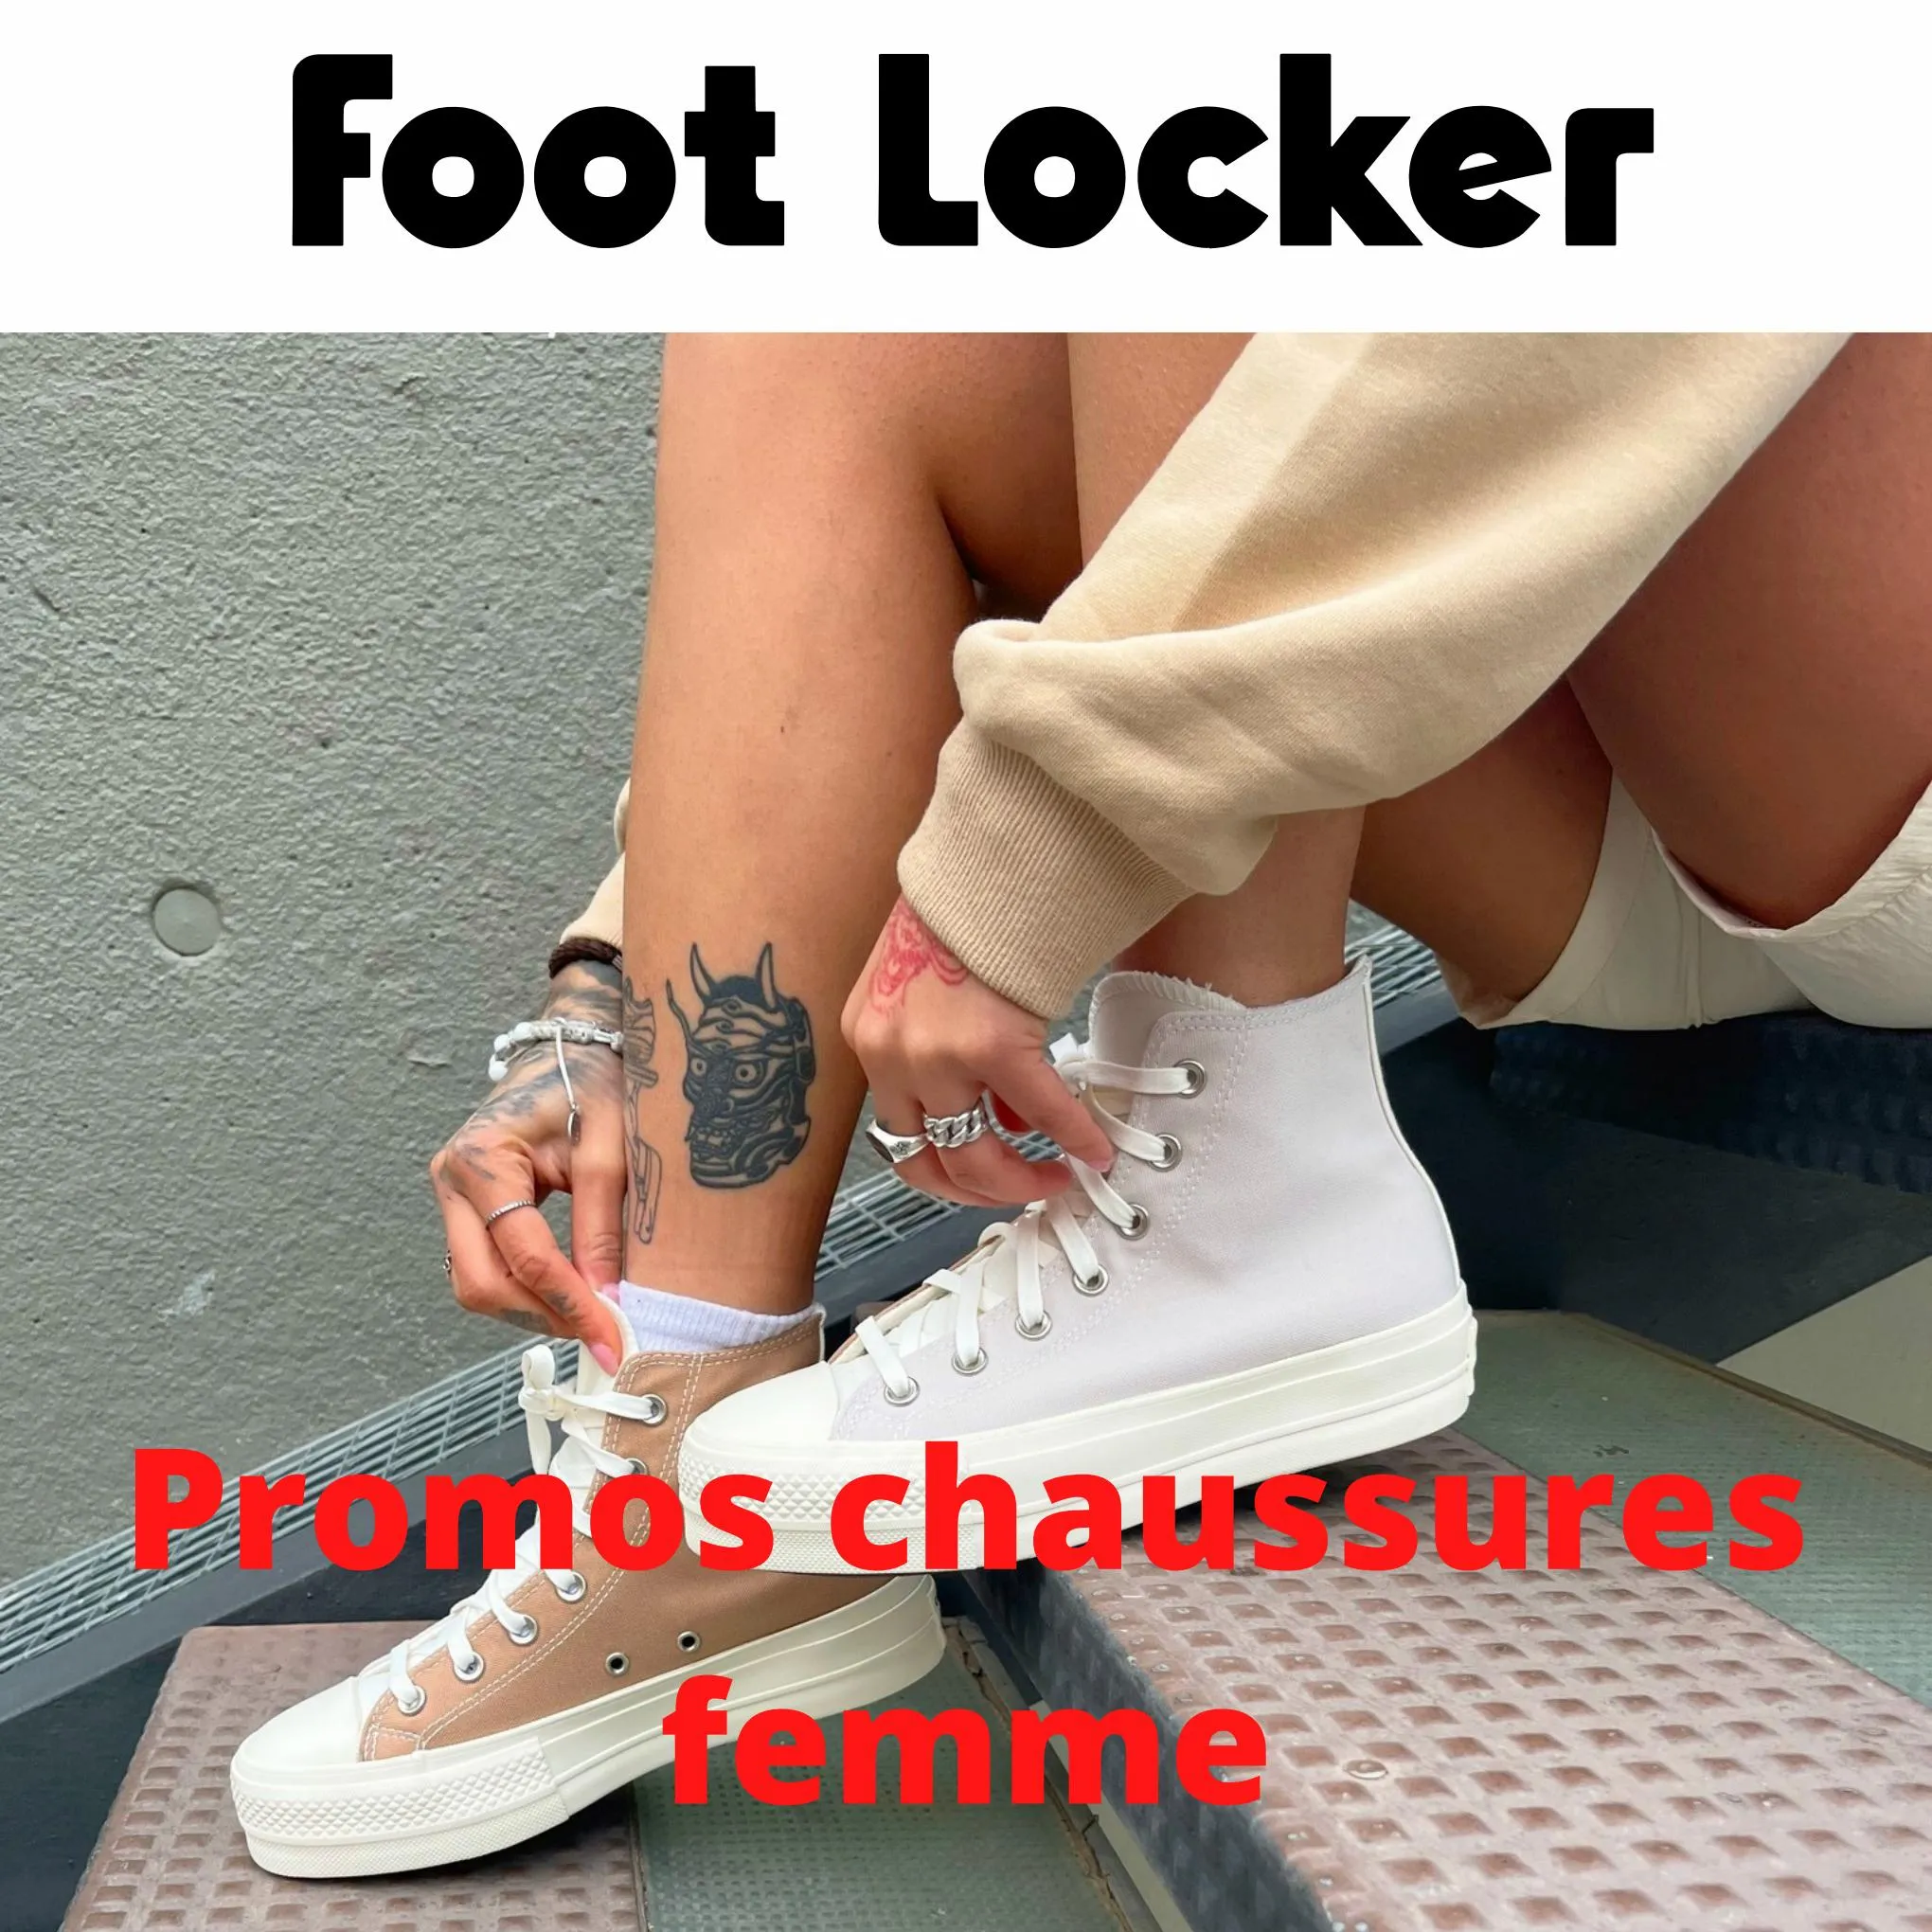 Catalogue Foot Locker Promos chaussures femme, page 00001